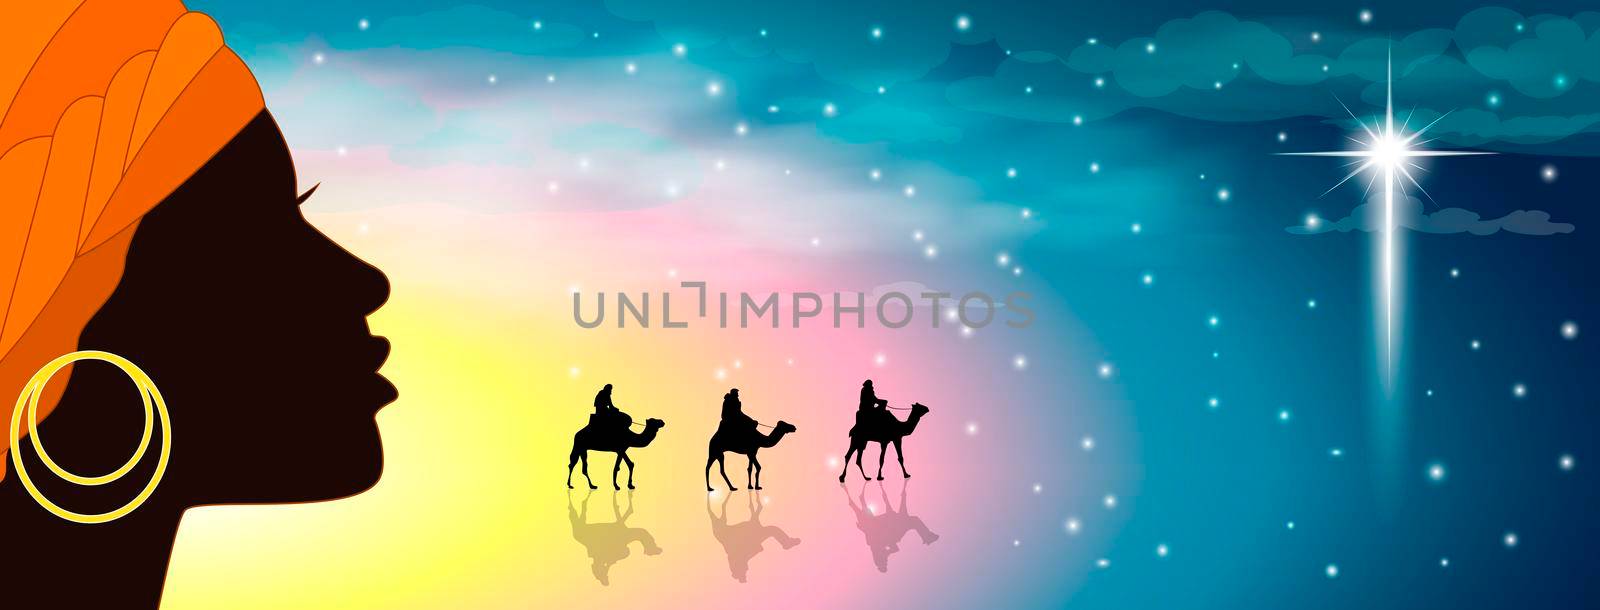 Silhouette of a young woman and a caravan of camels against the background of a starry sky and a shining star.